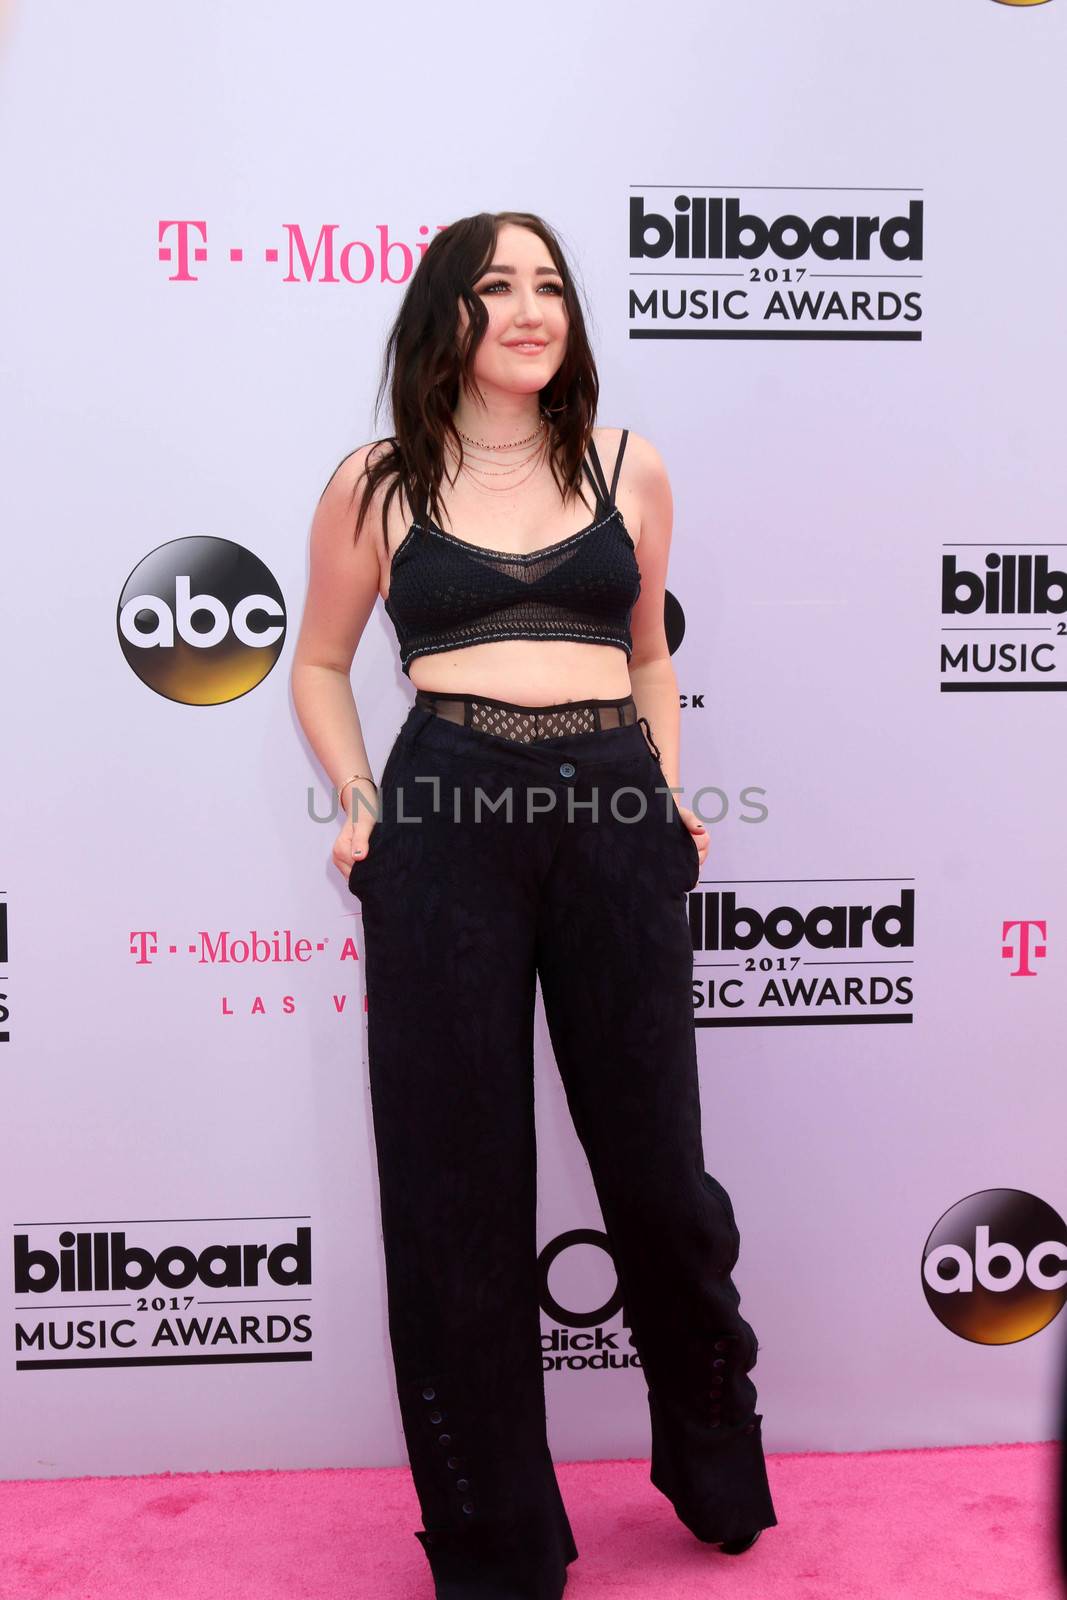 Noah Cyrus
at the 2017 Billboard Awards Arrivals, T-Mobile Arena, Las Vegas, NV 05-21-17/ImageCollect by ImageCollect